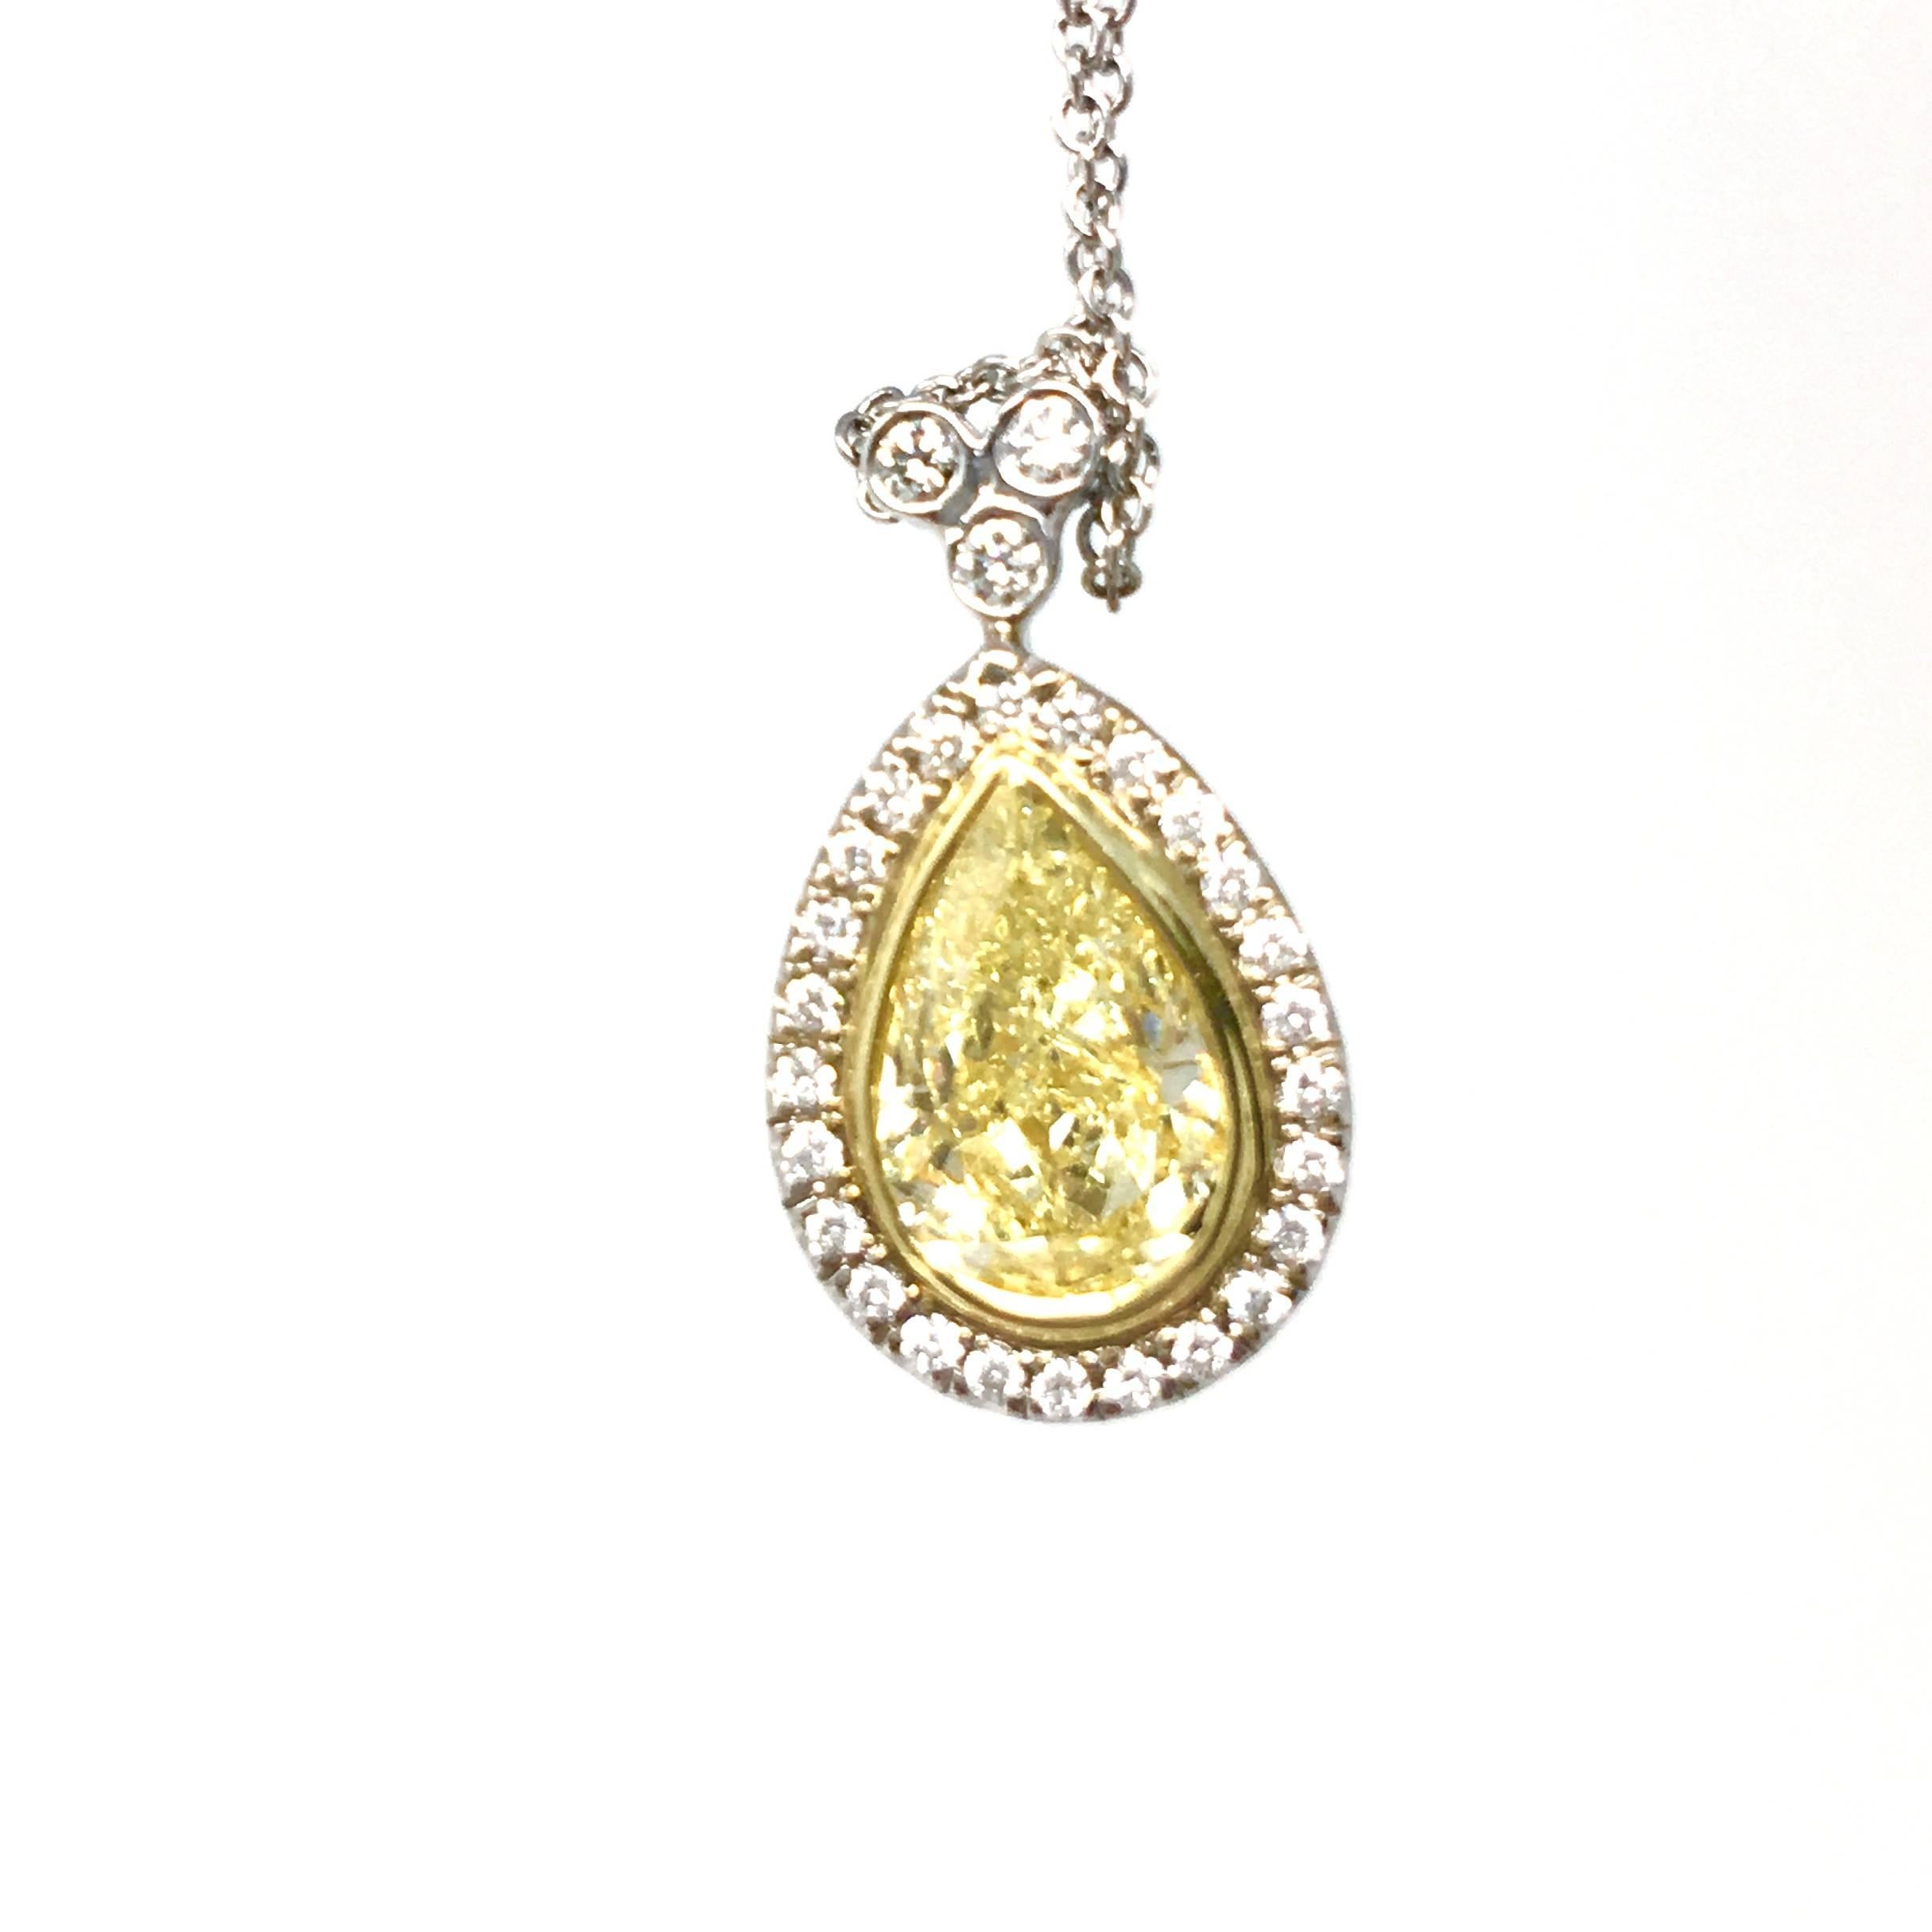 Pendant featuring a beautiful 1.51 carat pear shape yellow diamond.  The center is diamond is surrounded by 26 white diamonds totaling .60ctw.  Over 2 carats total of diamonds in the pendant.  The Diamond is set in 18K yellow gold and platinum. 
GIA